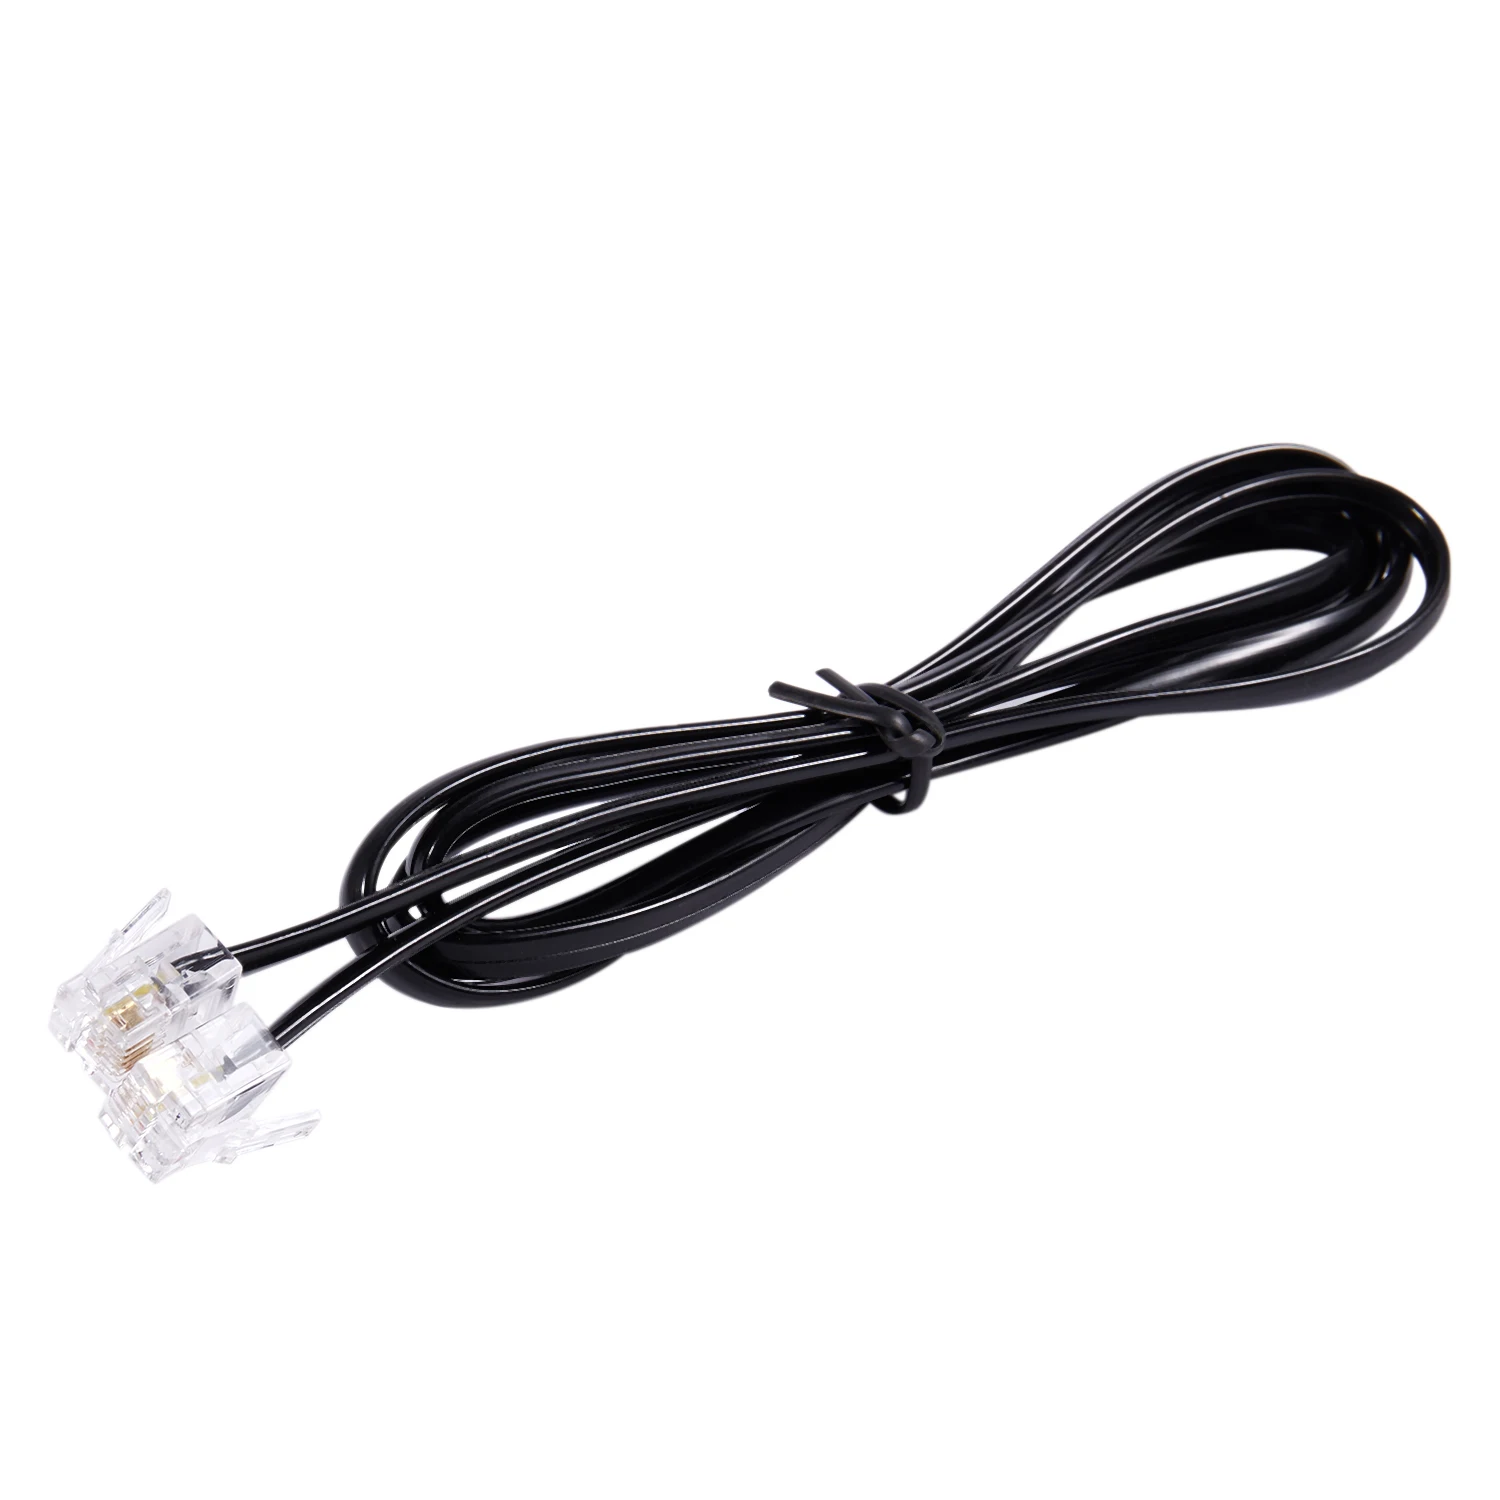 RJ11 6P4C Telephone Cable Cord ADSL Modem 1 Meters images - 6